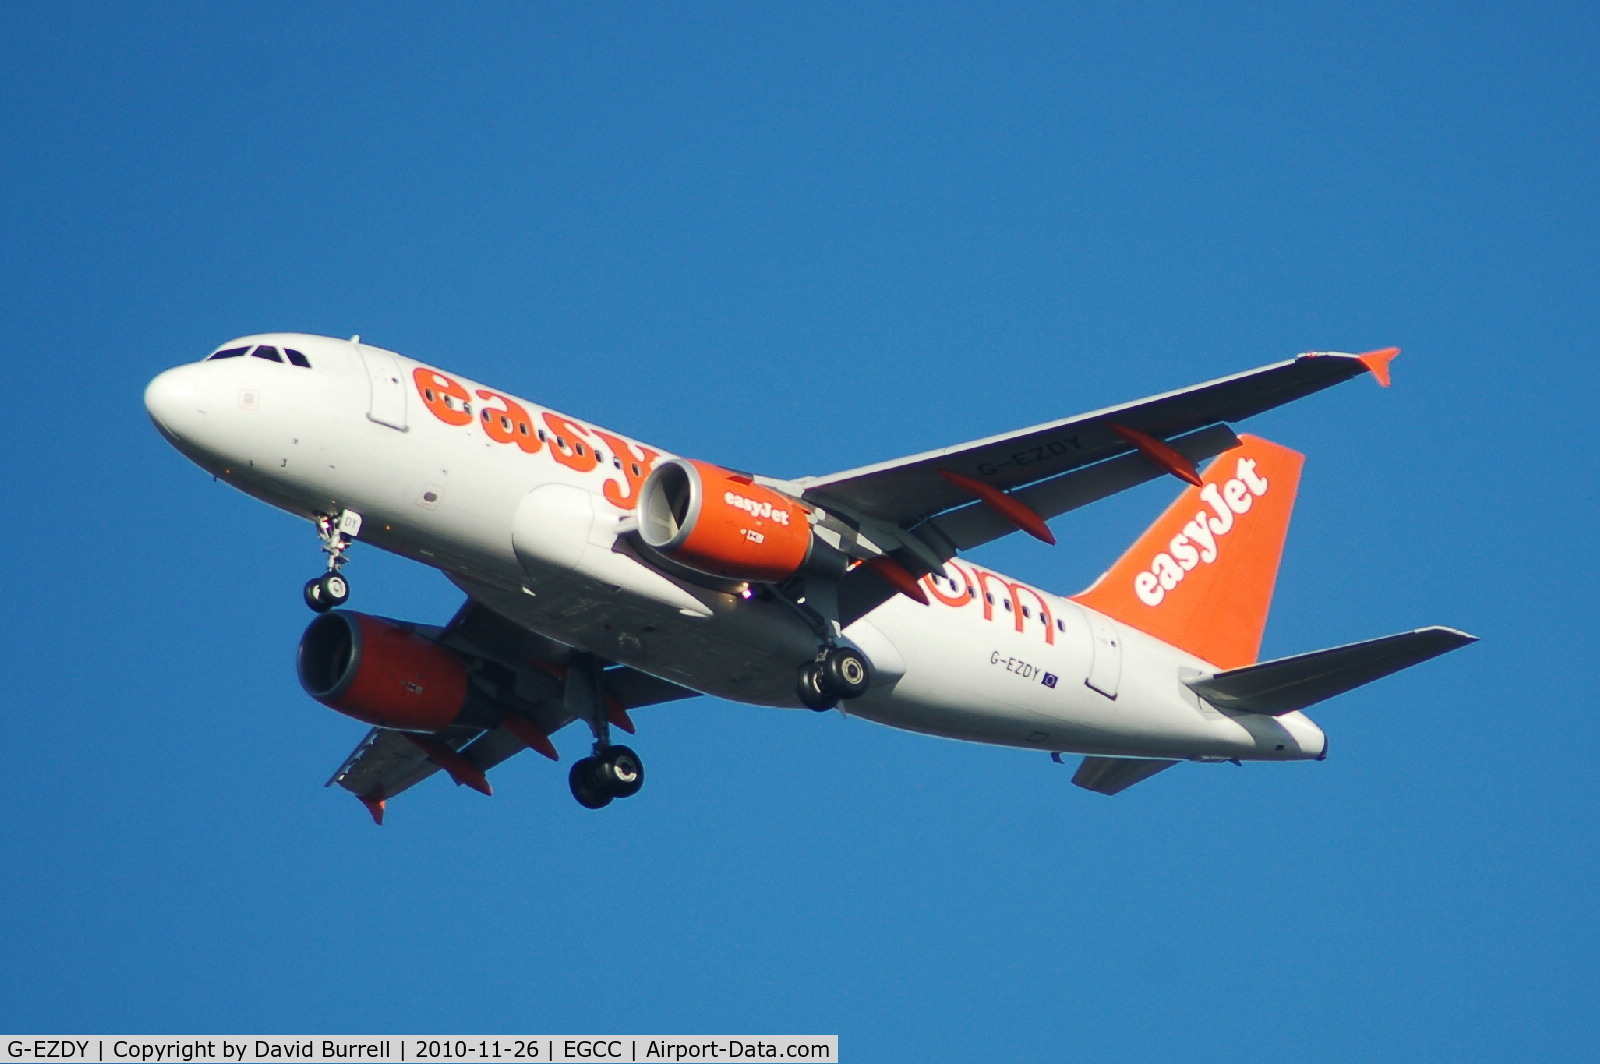 G-EZDY, 2008 Airbus A319-111 C/N 3763, EasyJet G-EZDY Airbus A319-111 on approach to Manchester Airport